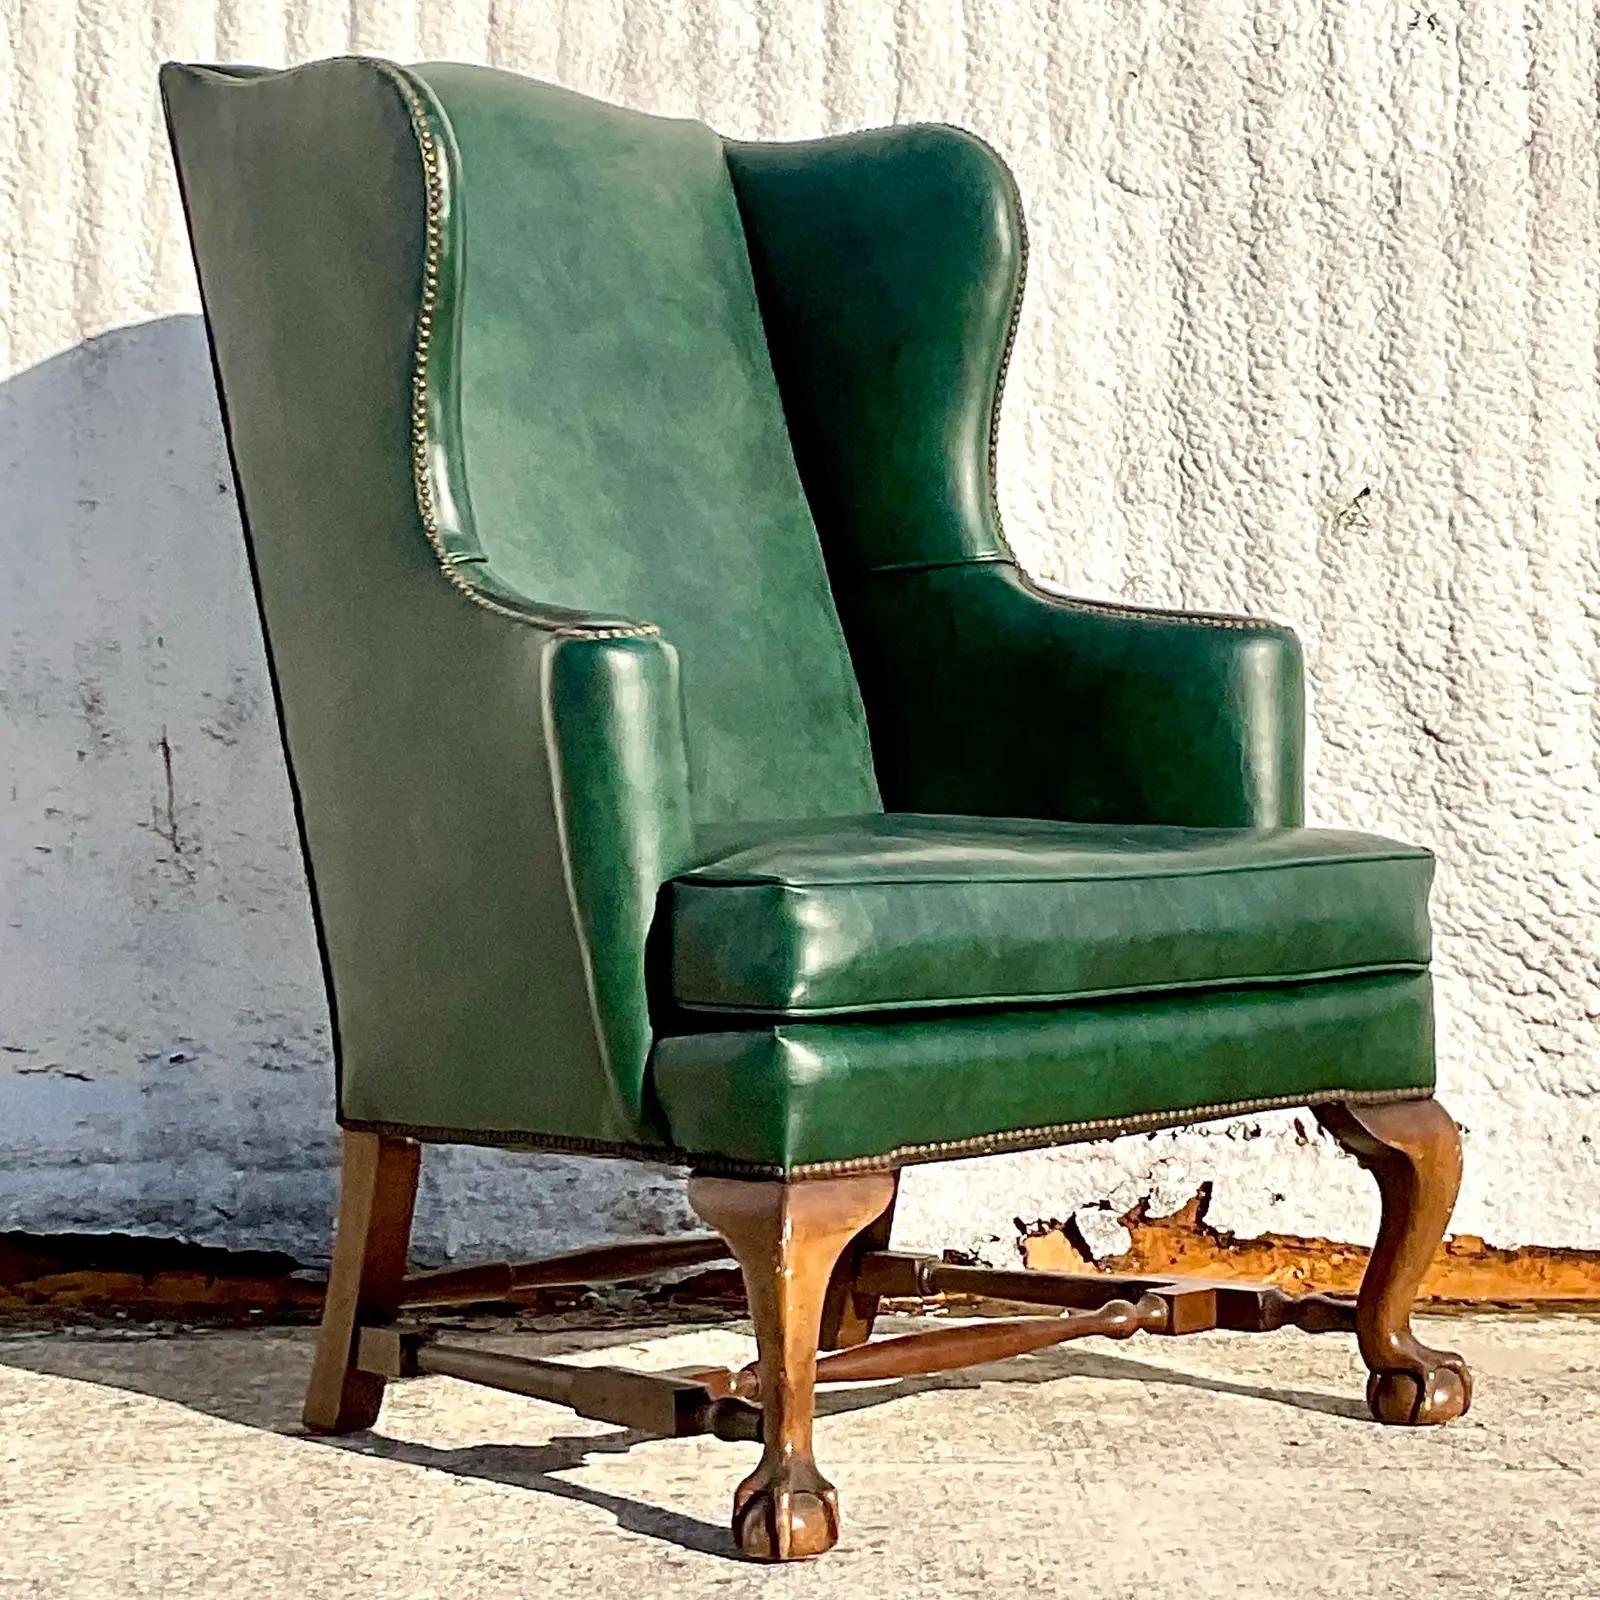 vintage green chairs